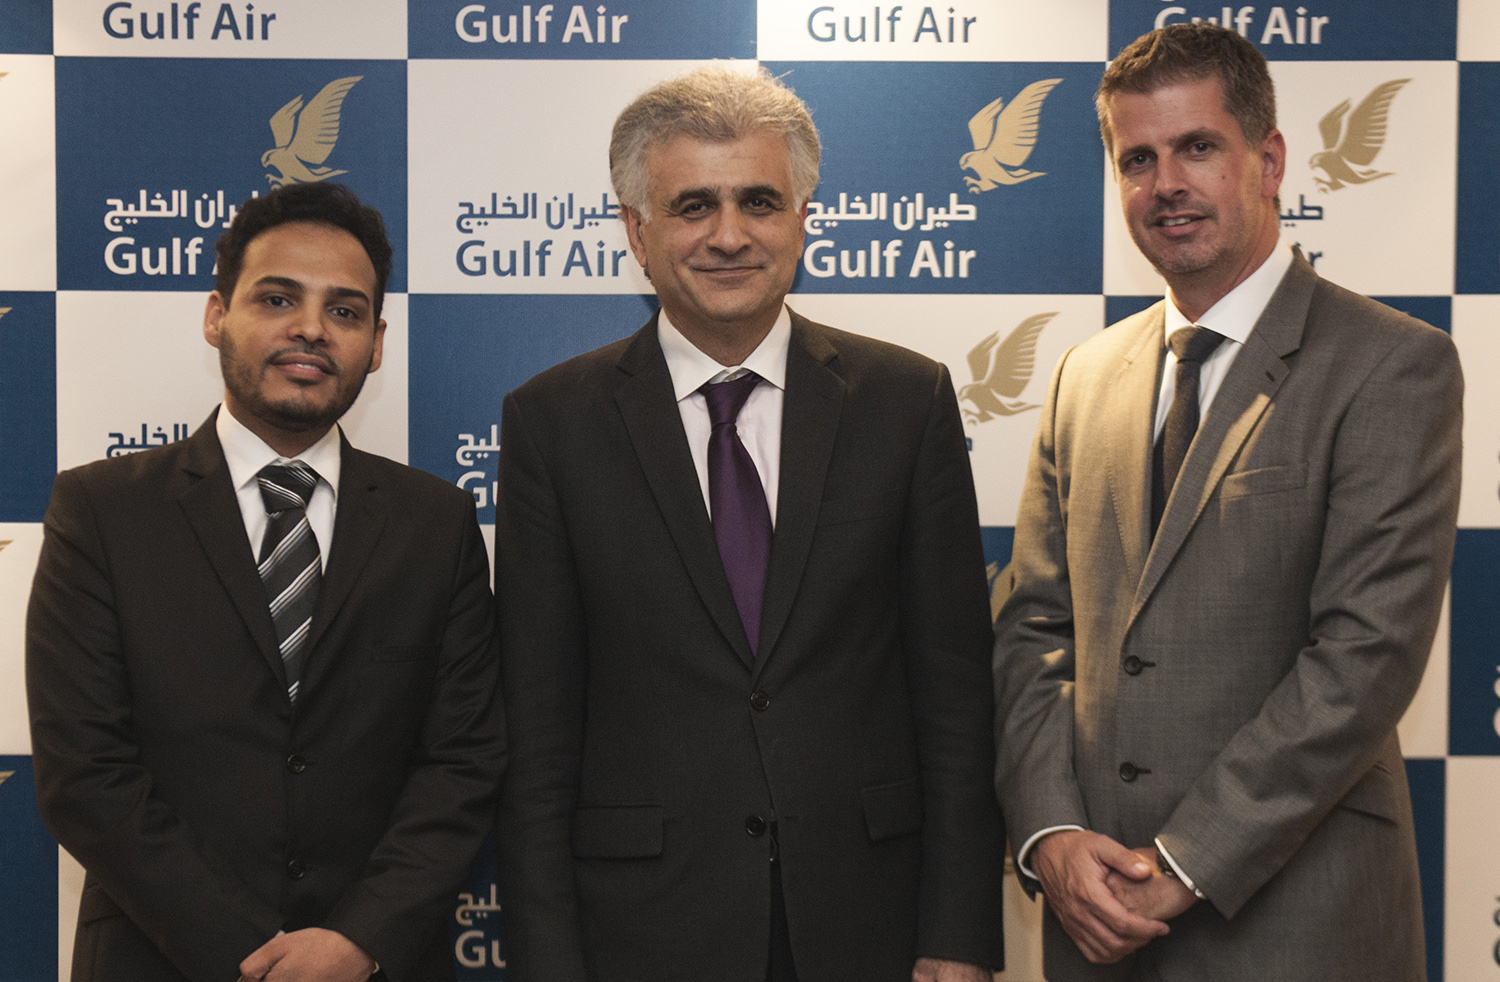 Gulf Air builds private cloud with Red Hat Technologies